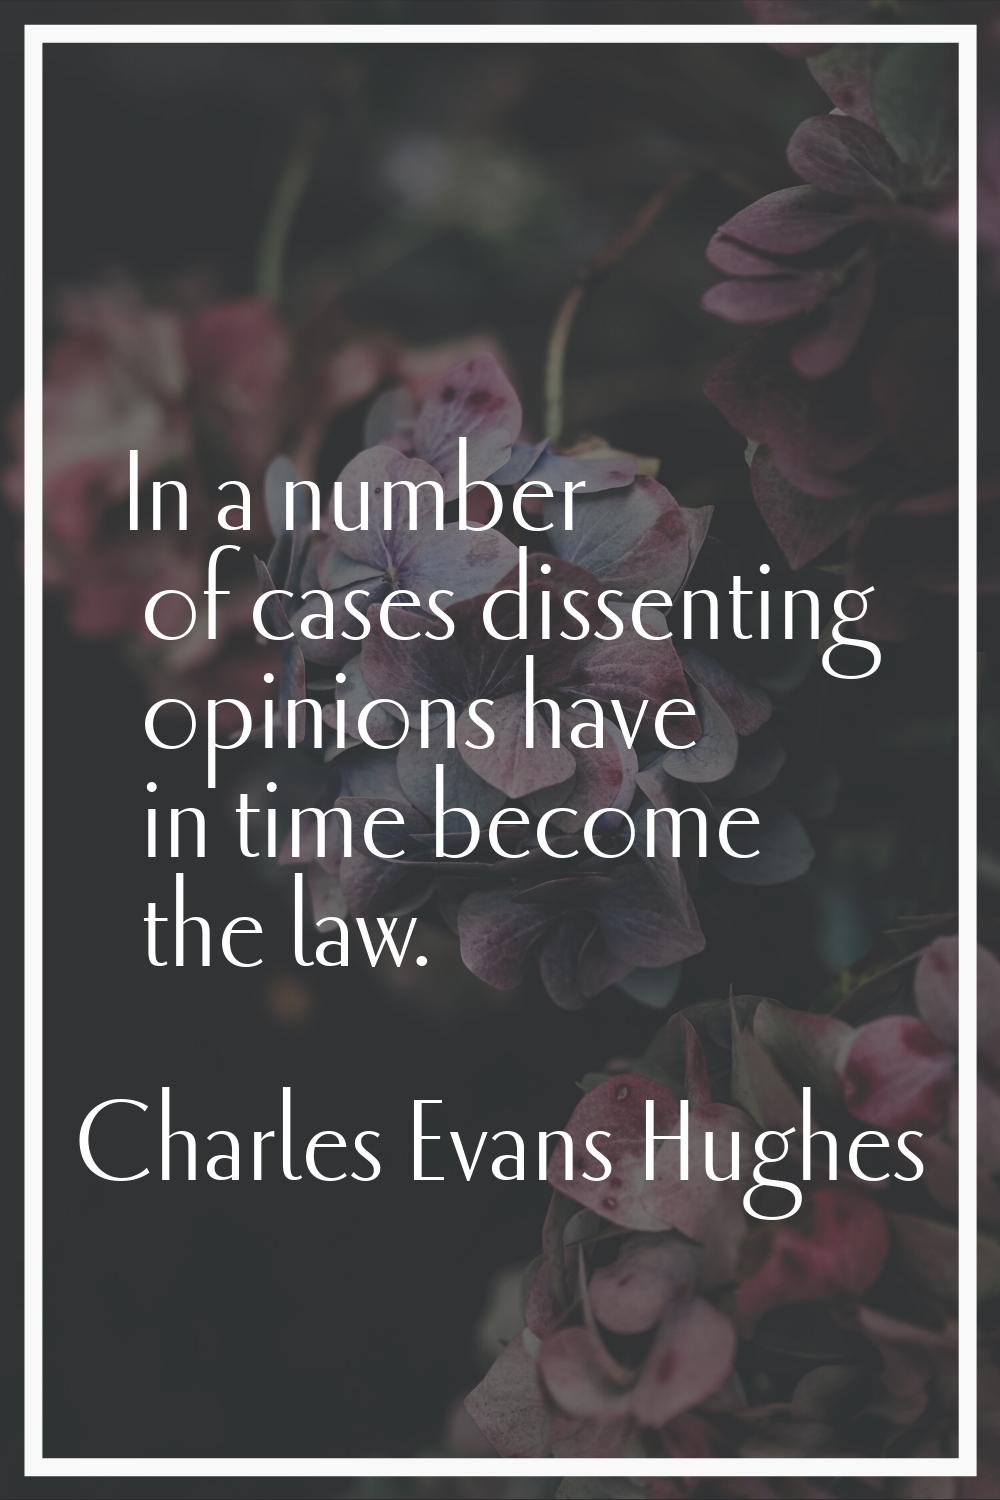 In a number of cases dissenting opinions have in time become the law.